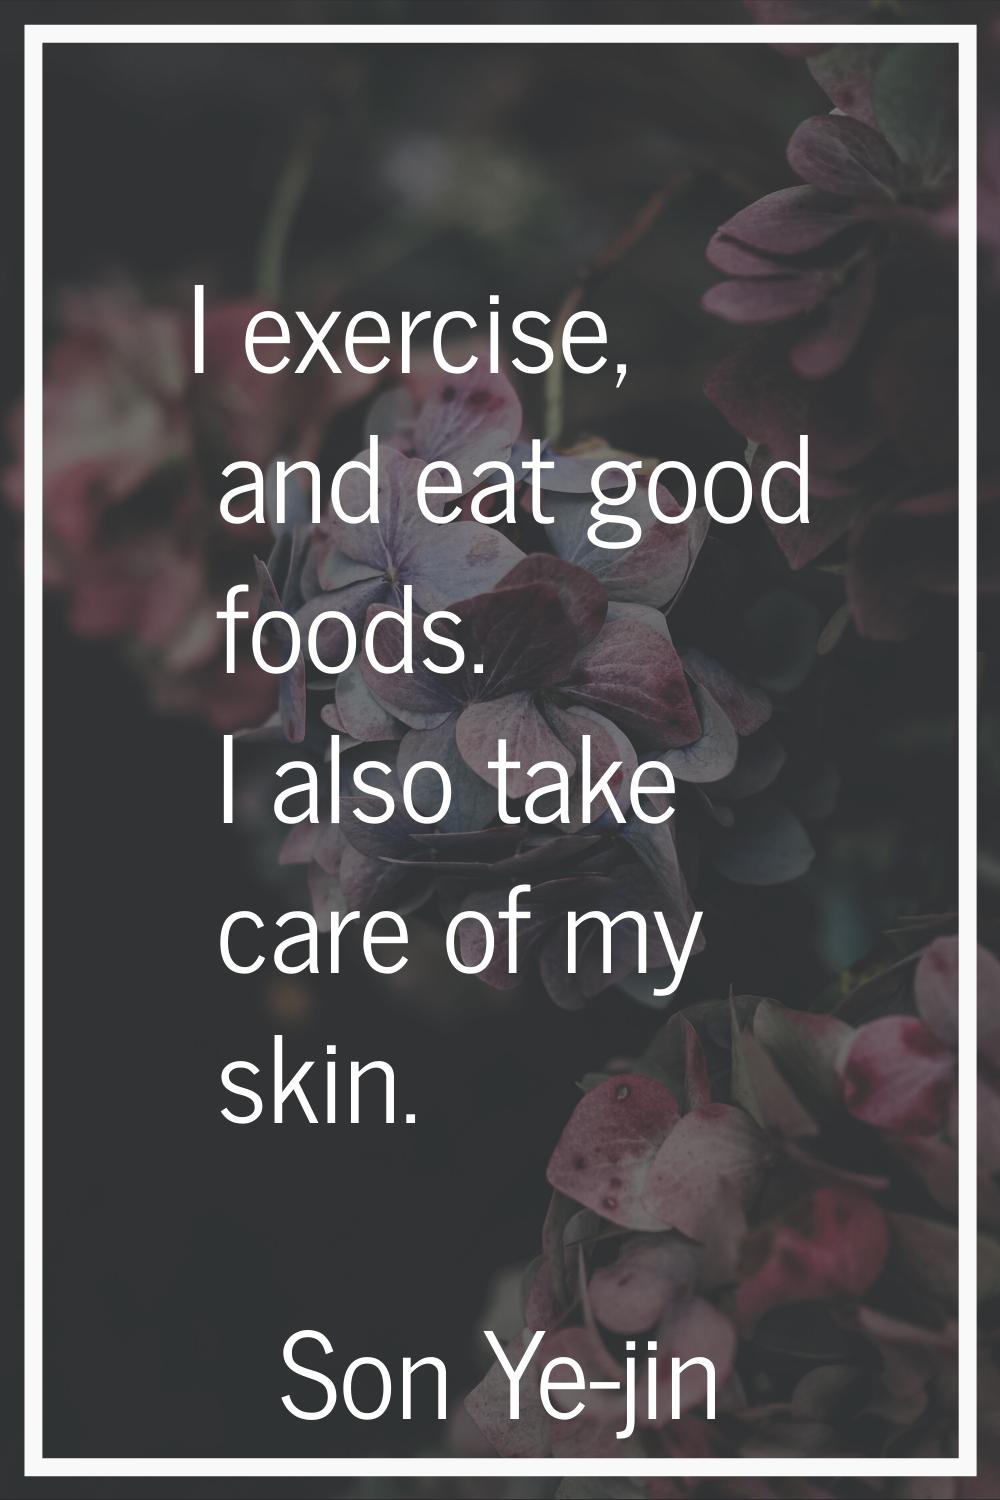 I exercise, and eat good foods. I also take care of my skin.